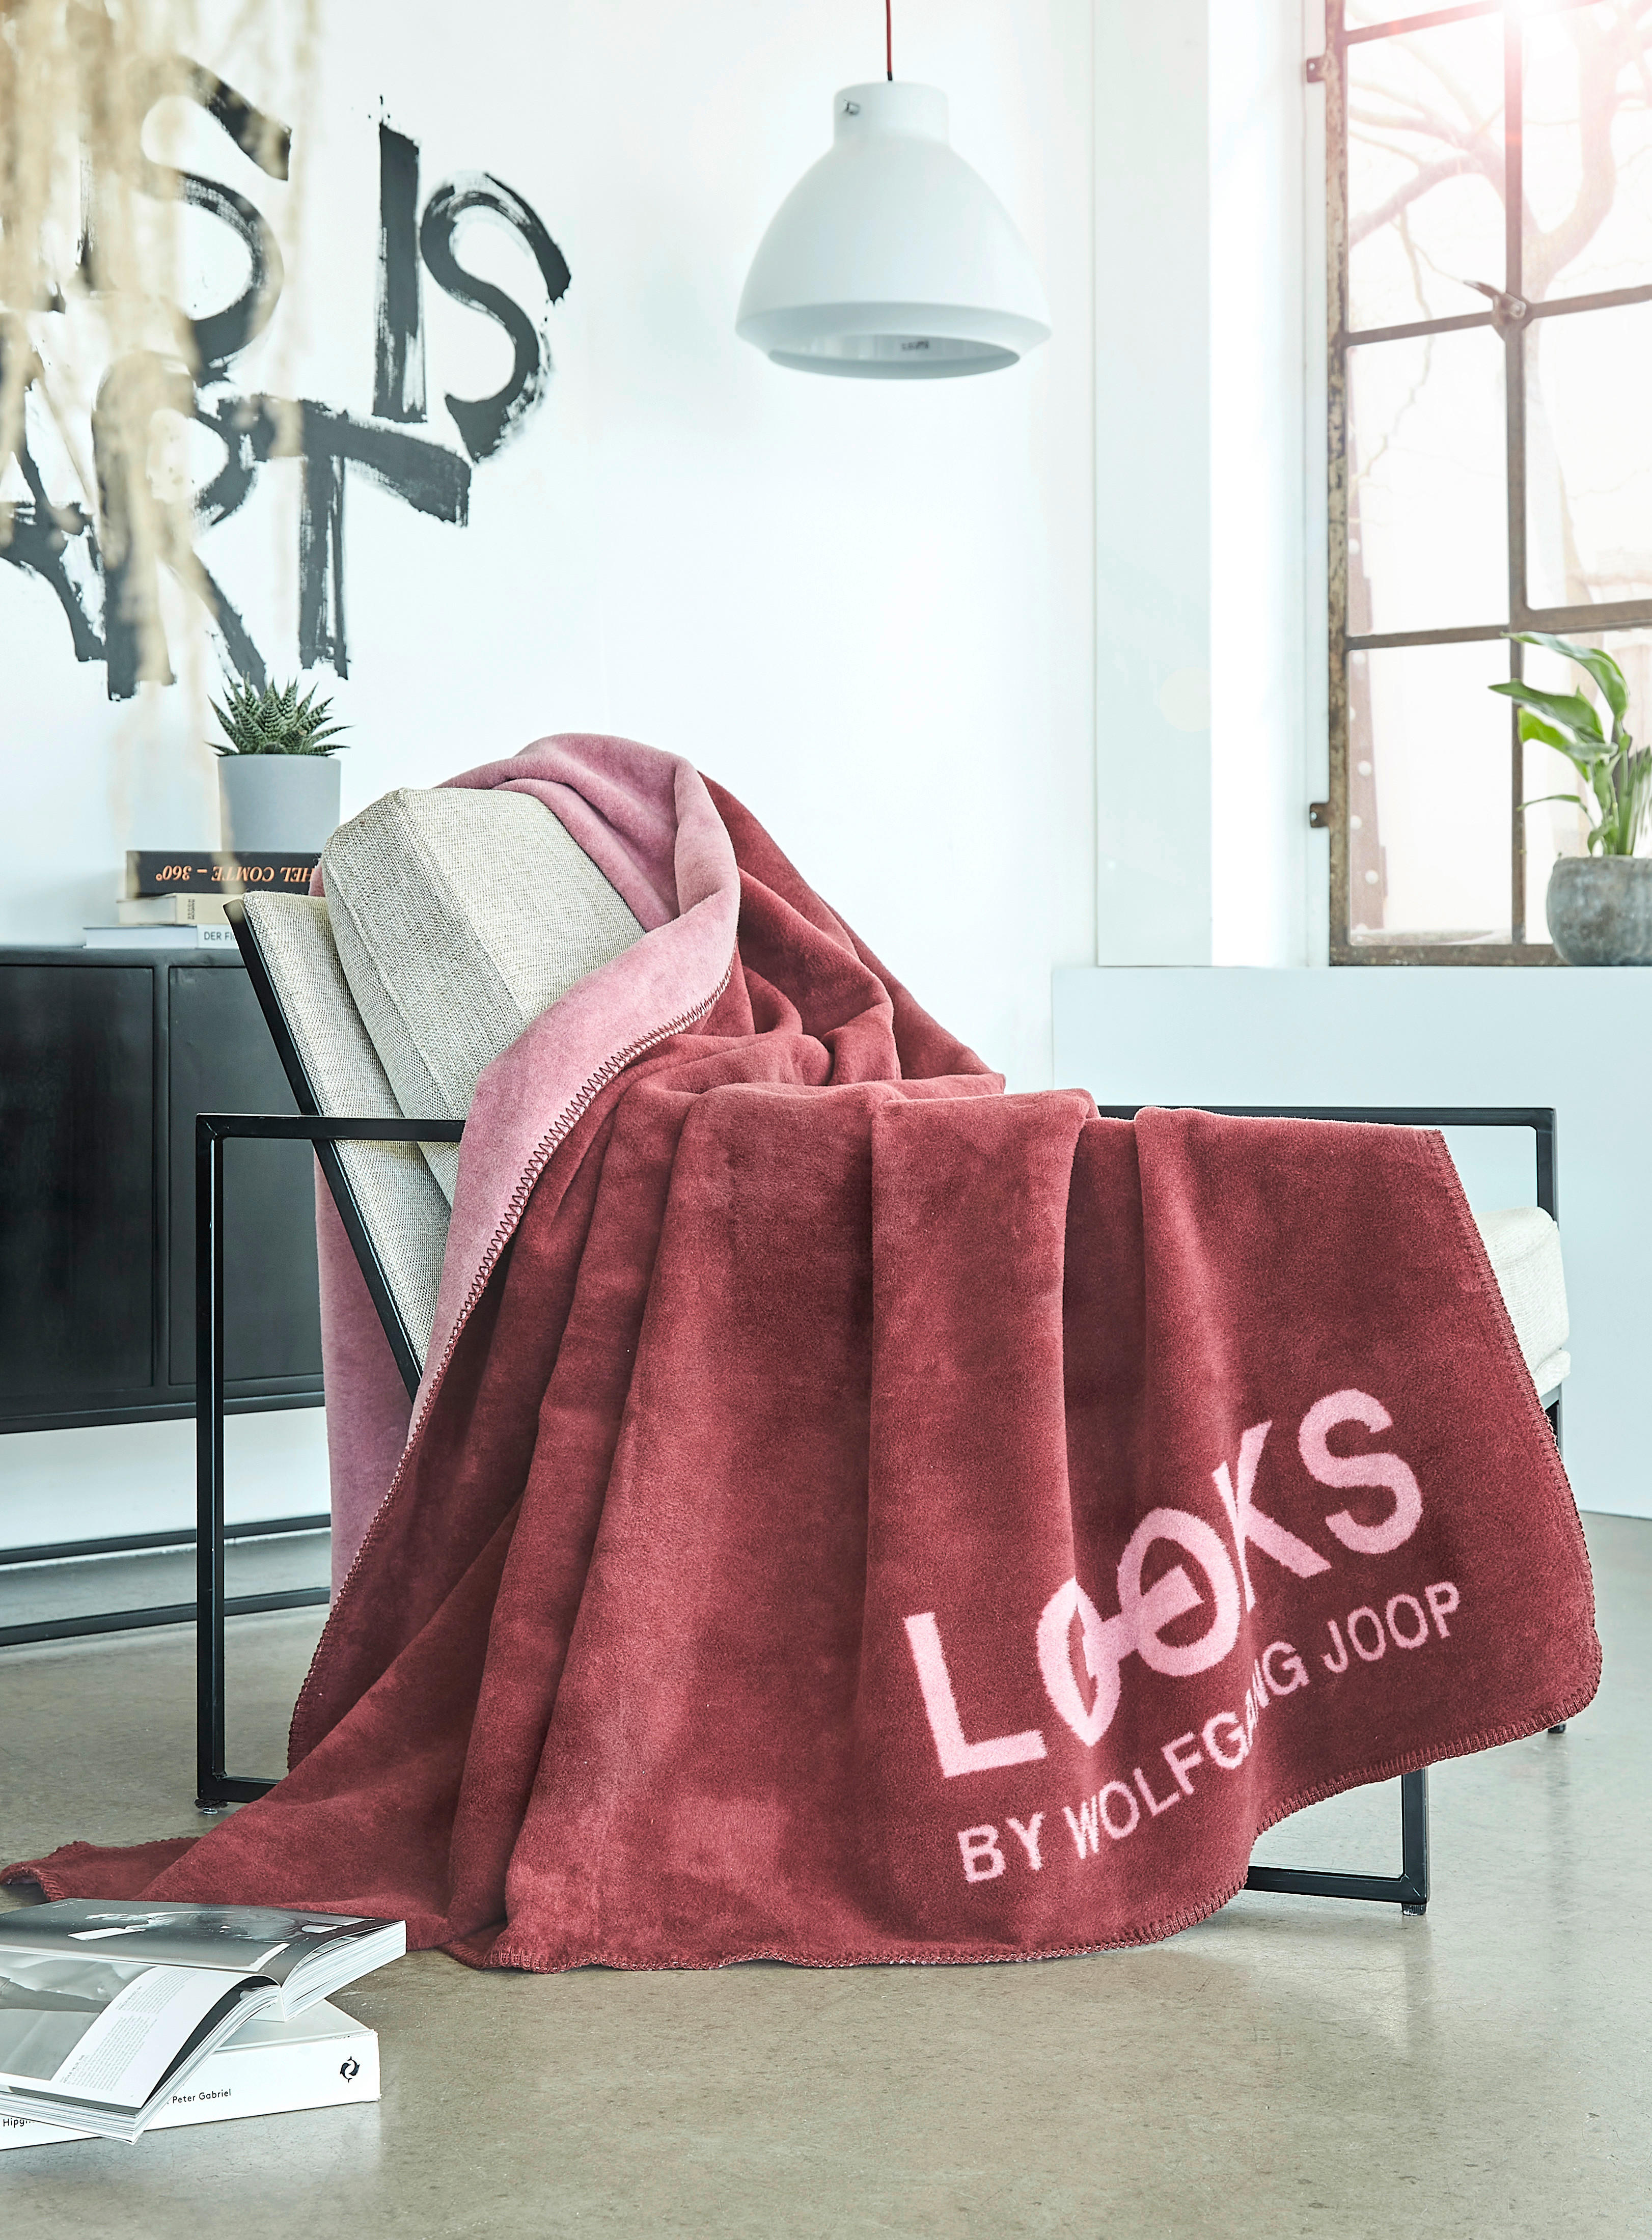 DECKE 2380 Doubleface 150/200 cm  - Rot/Rosa, KONVENTIONELL, Textil (150/200cm) - LOOKS by W.Joop